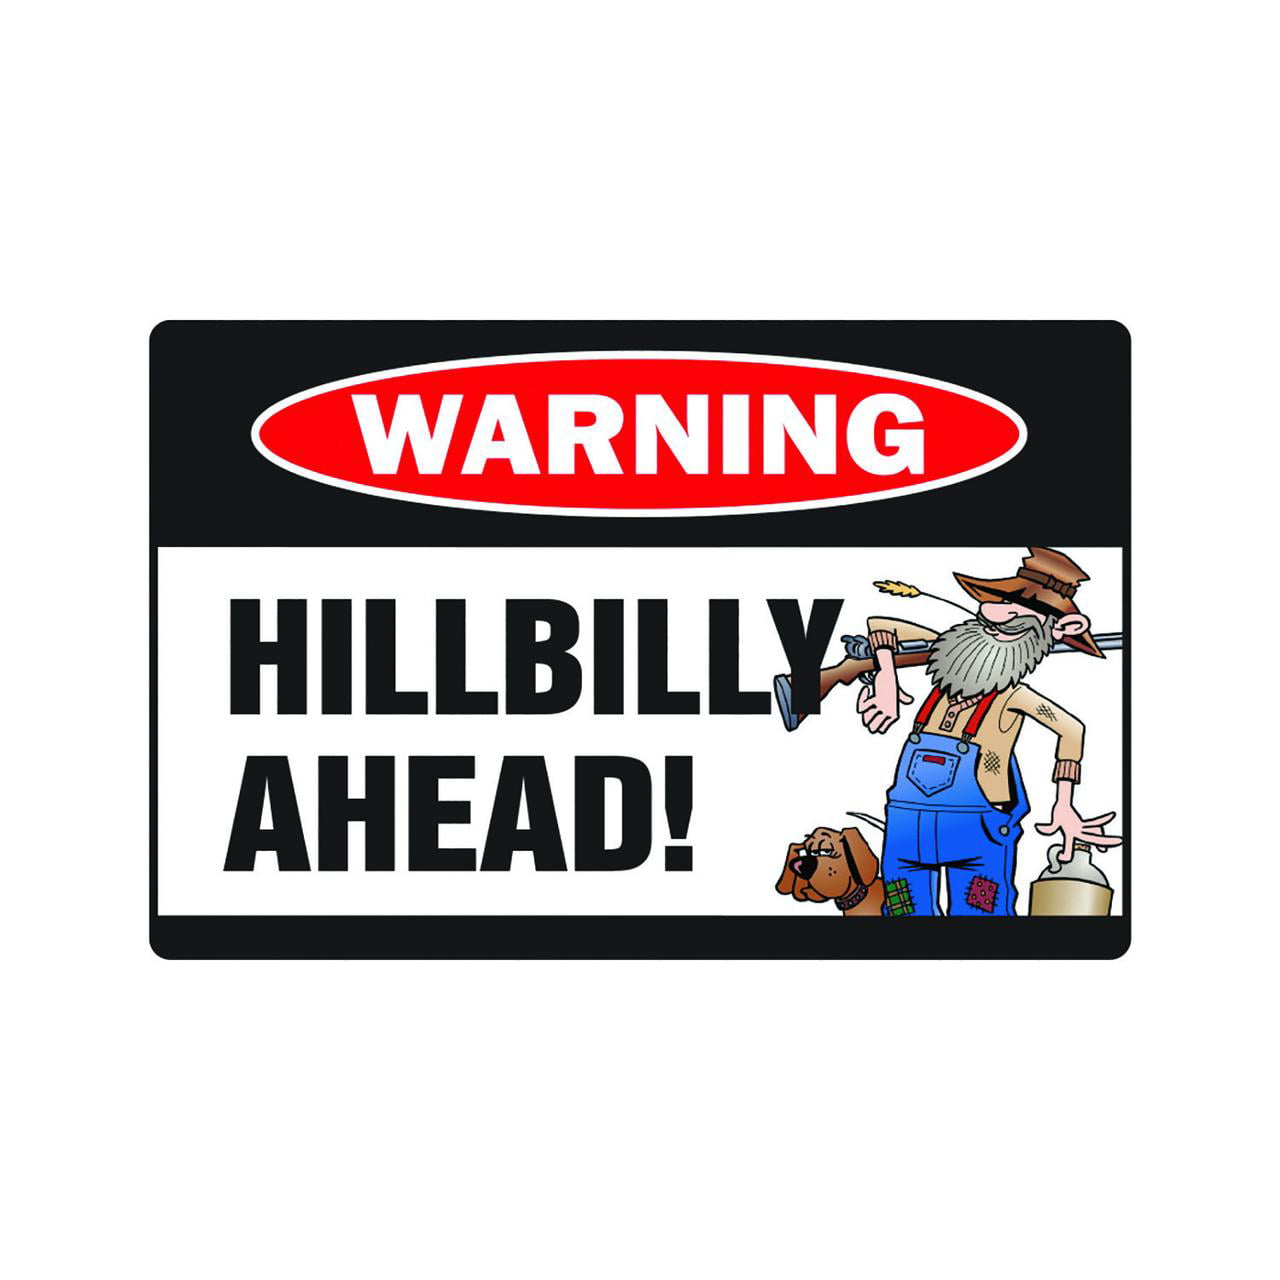 HILLBILLY AHEAD Warning Sign Or Decals southerner barefoot shotgun south  country 